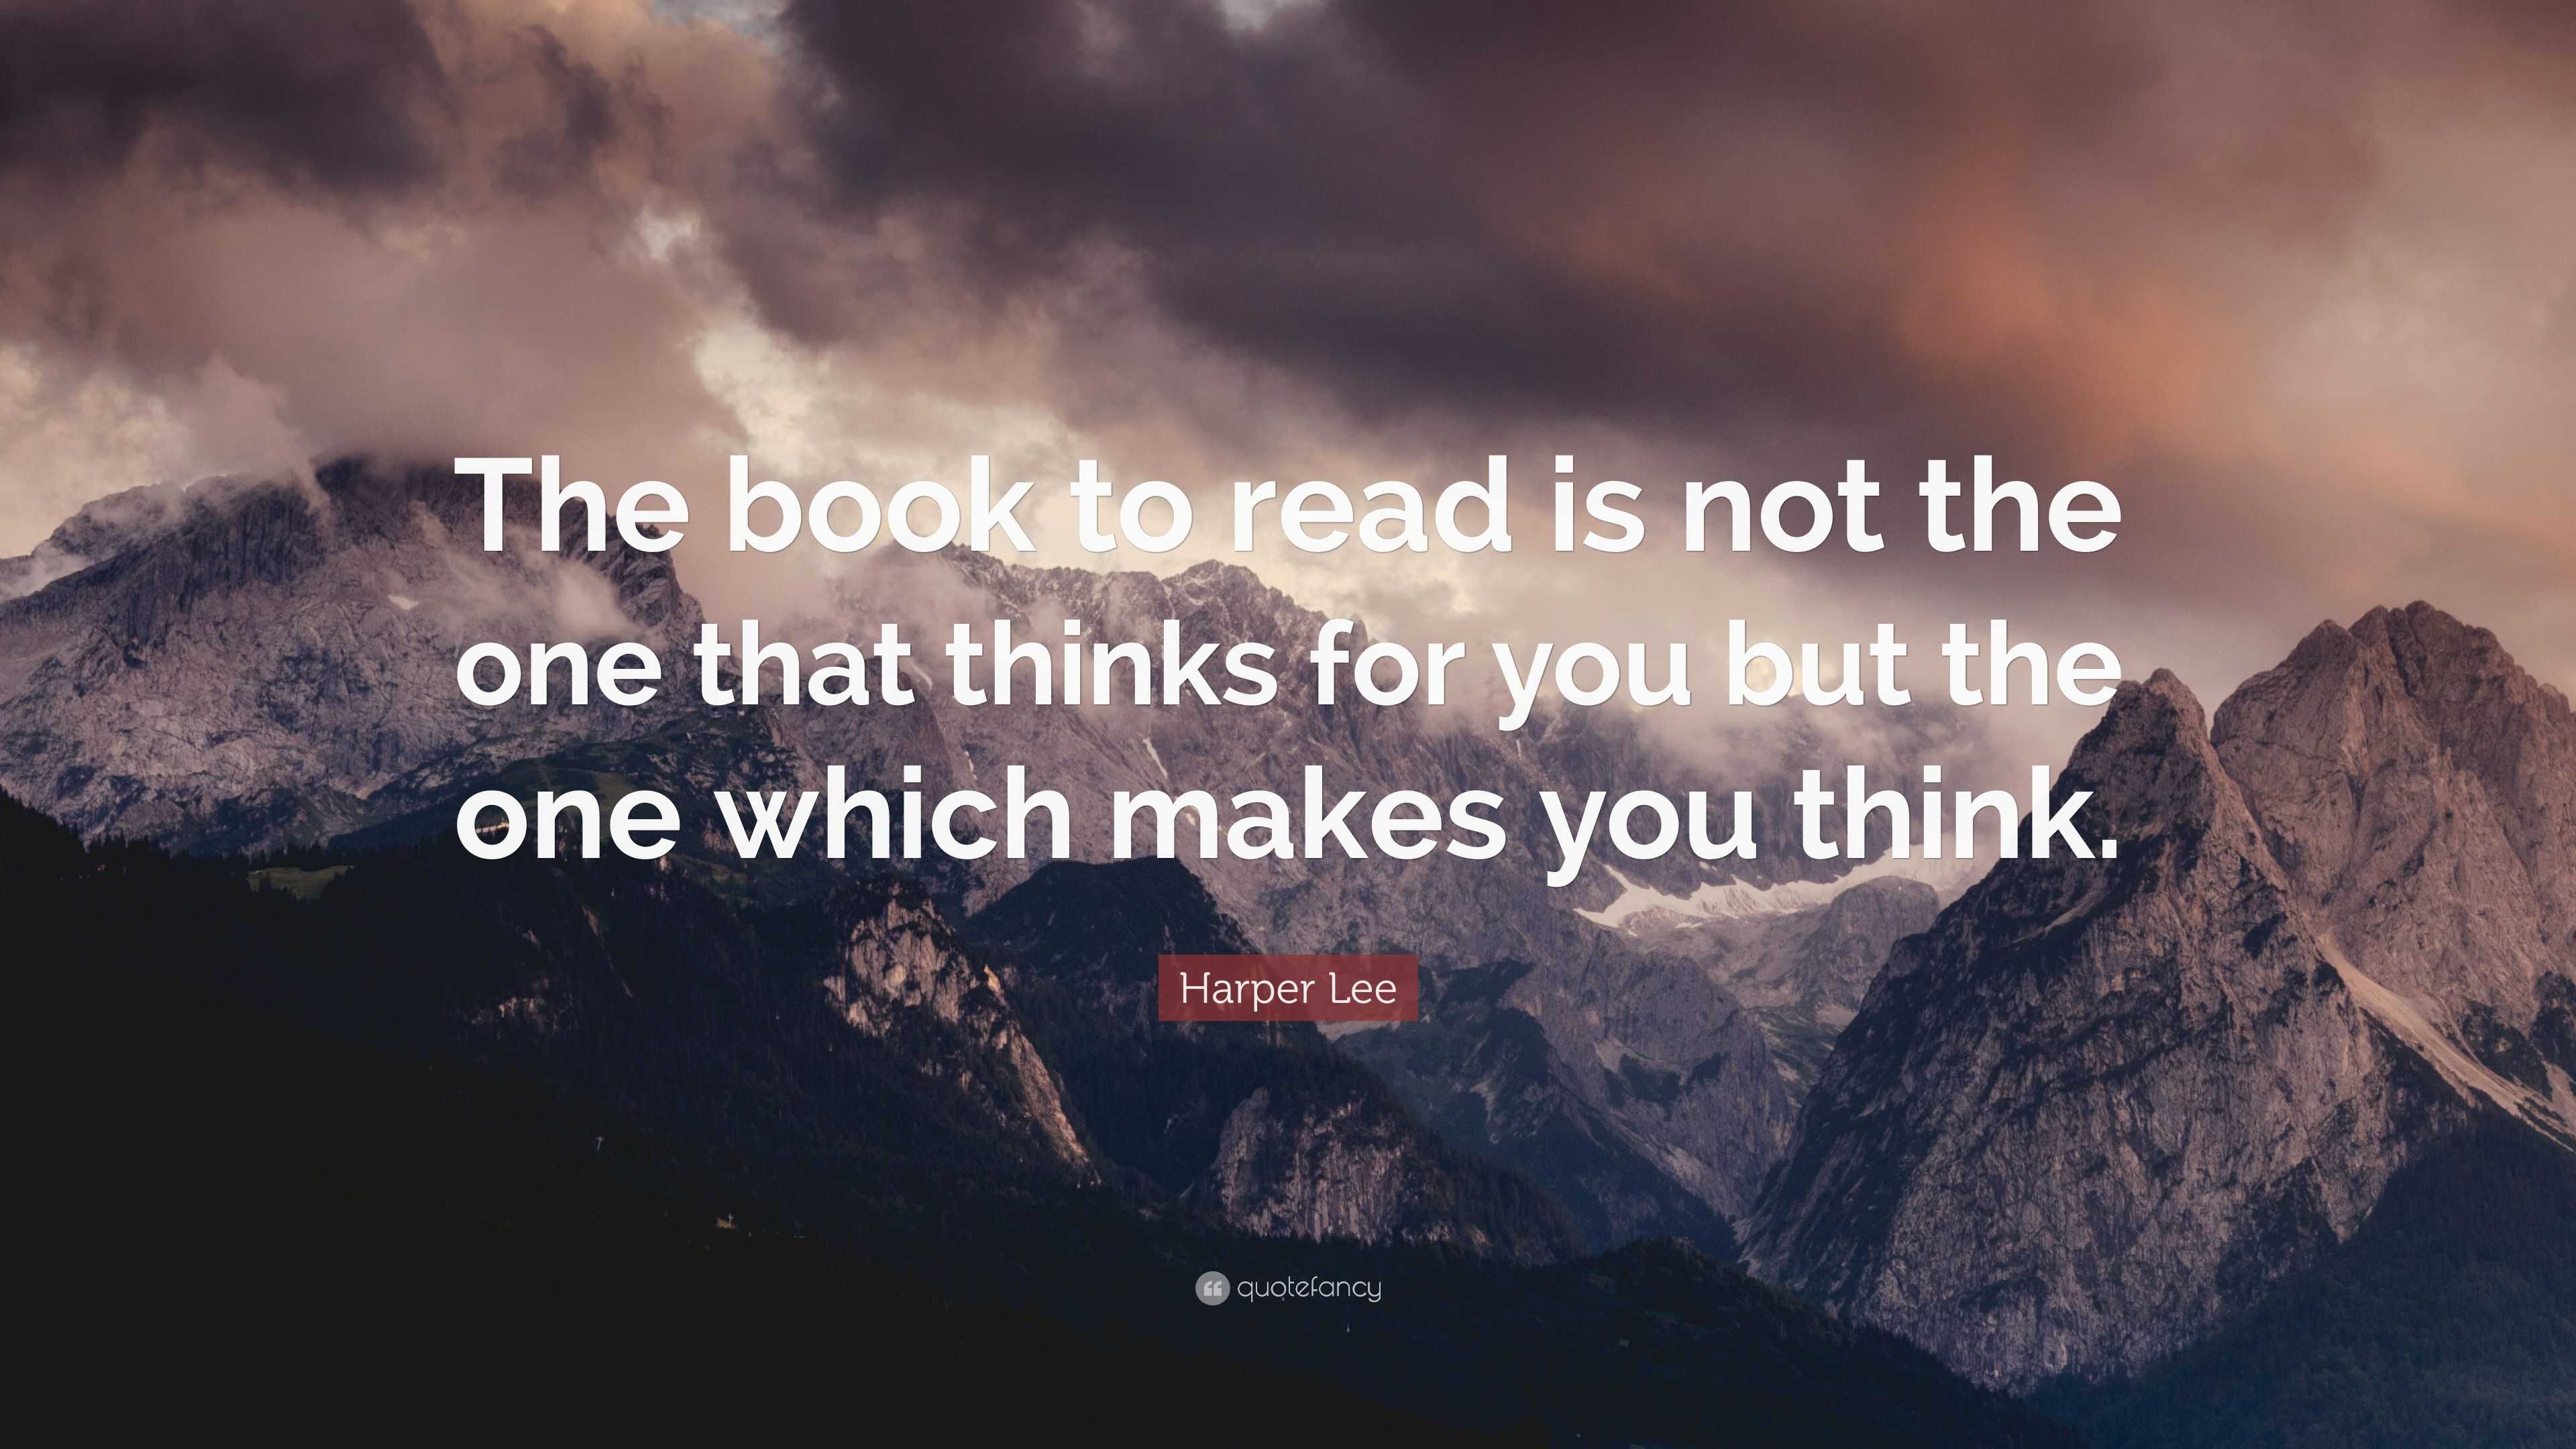 Harper Lee Quote: “The book to read is not the one that thinks for you ...